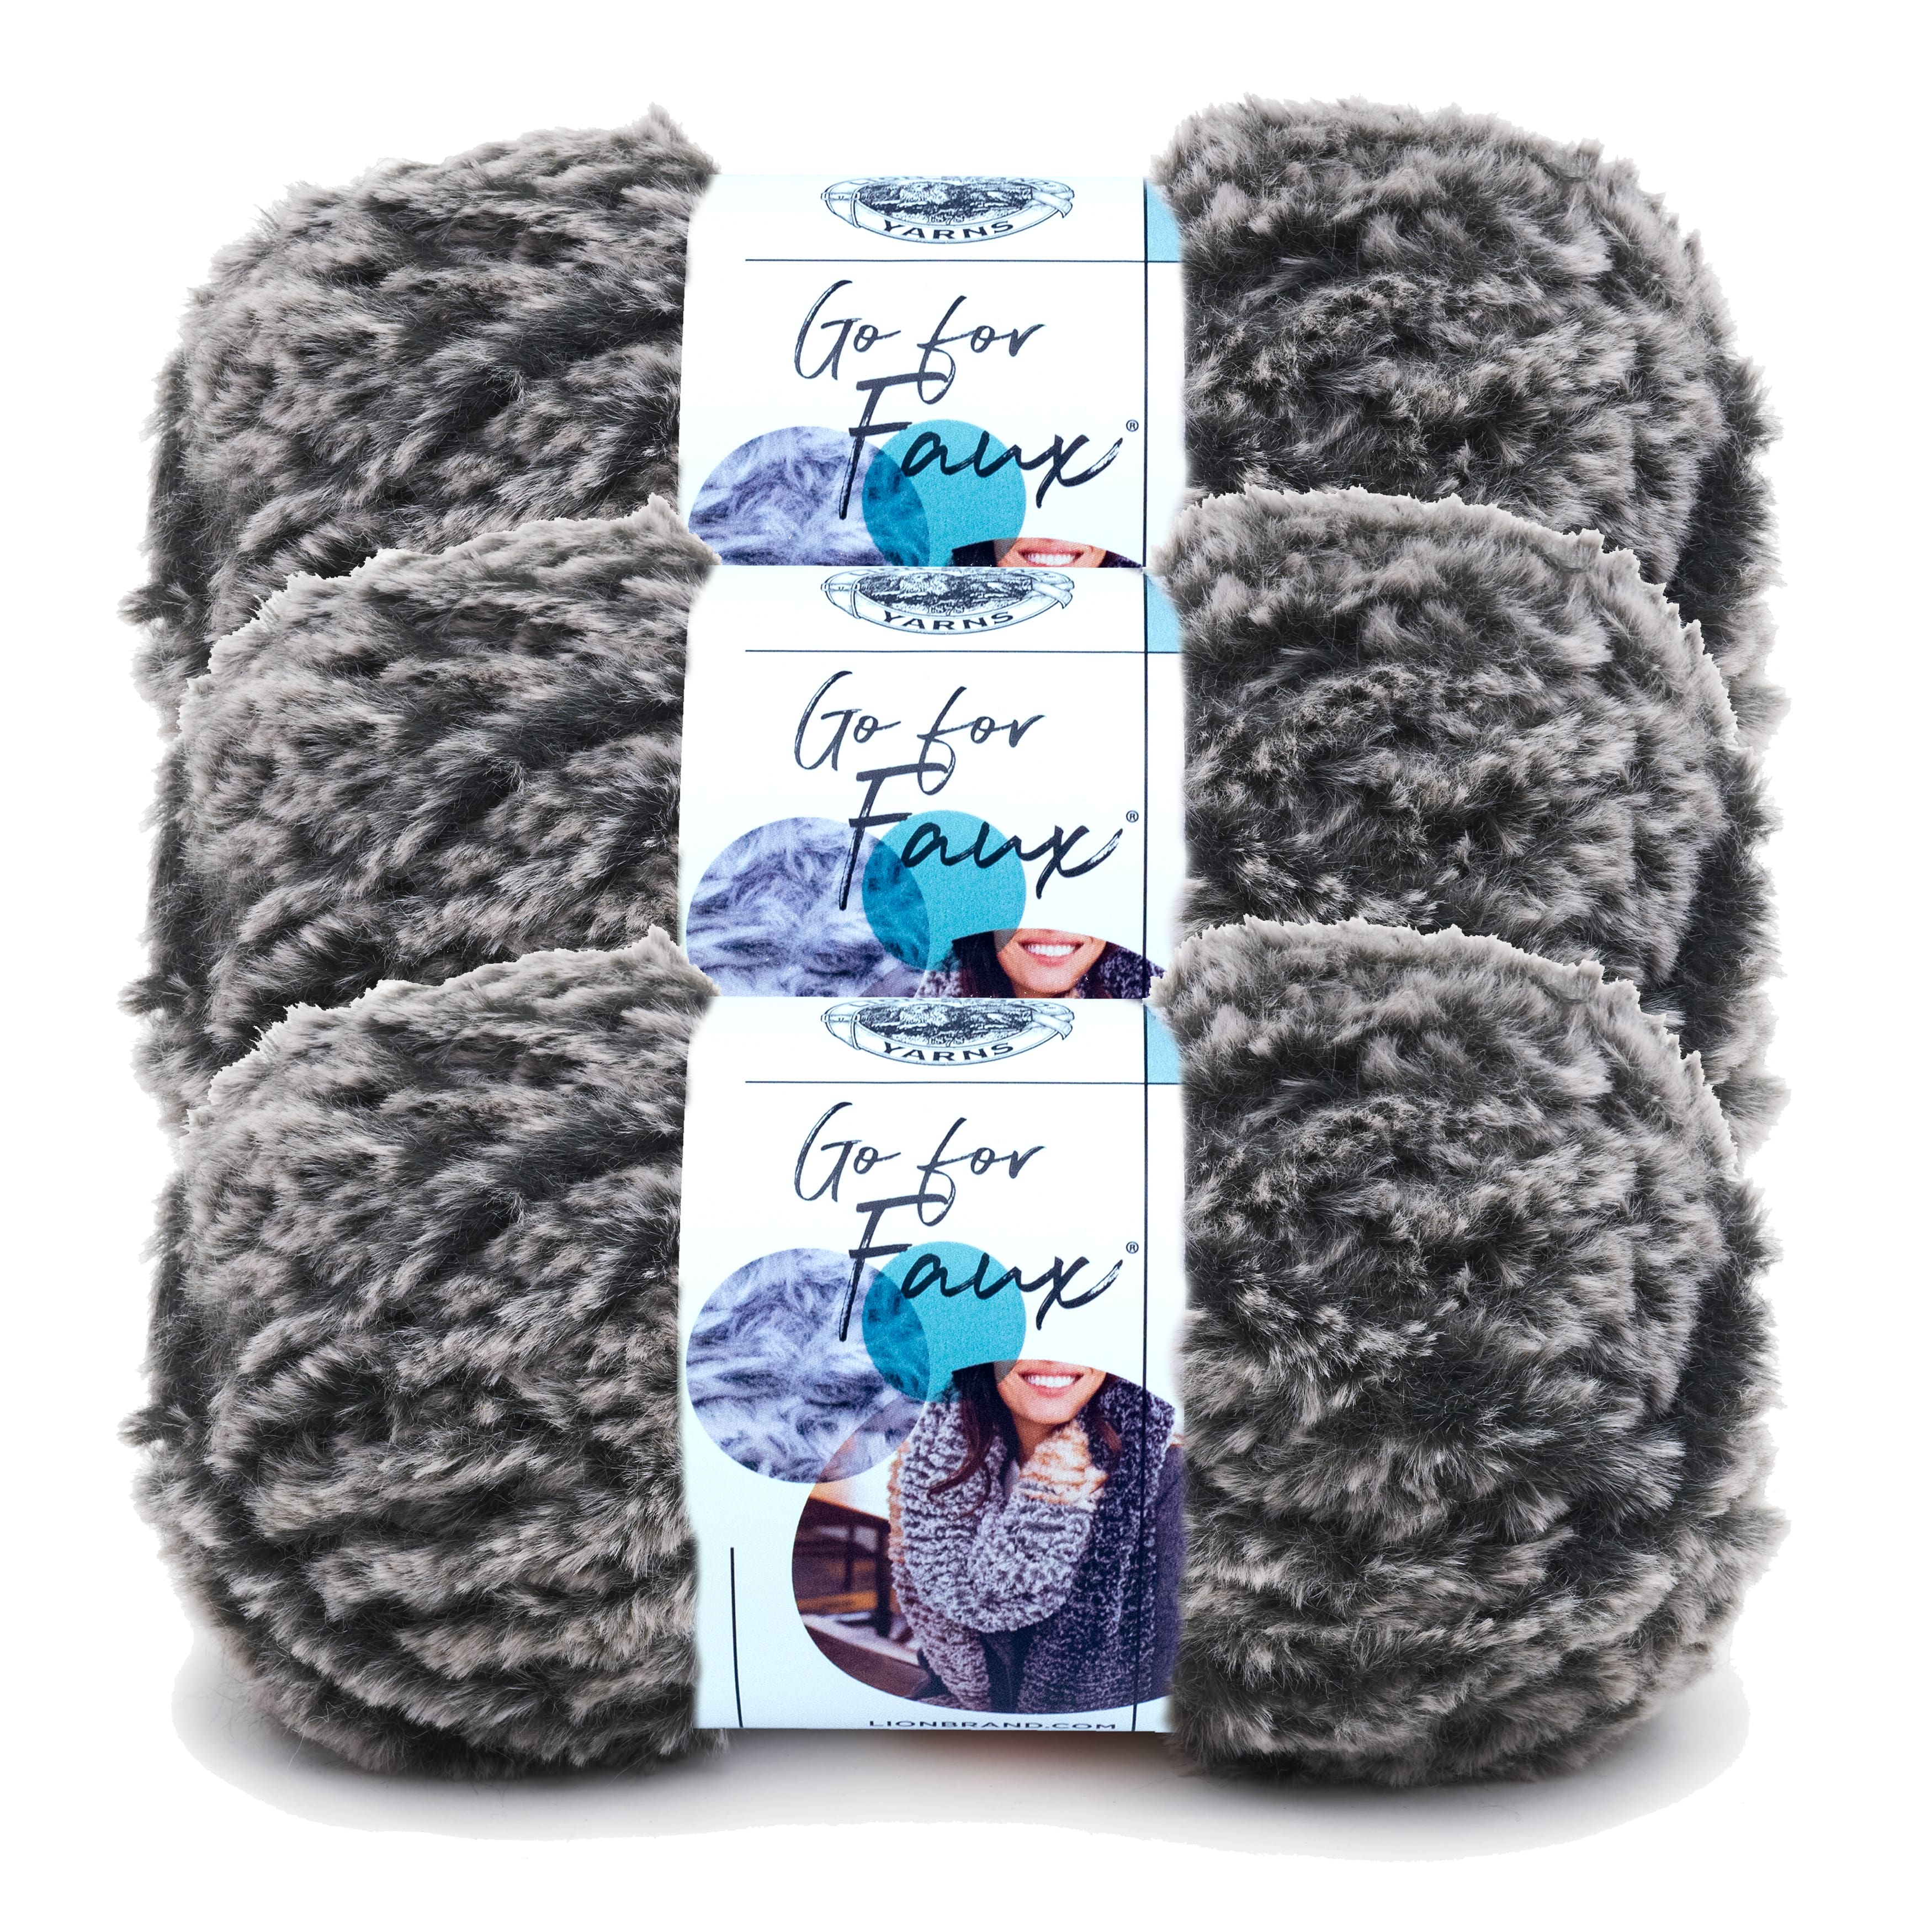 Lion Brand Go For Faux Thick & Quick Yarn-Blue Bengal, 1 count